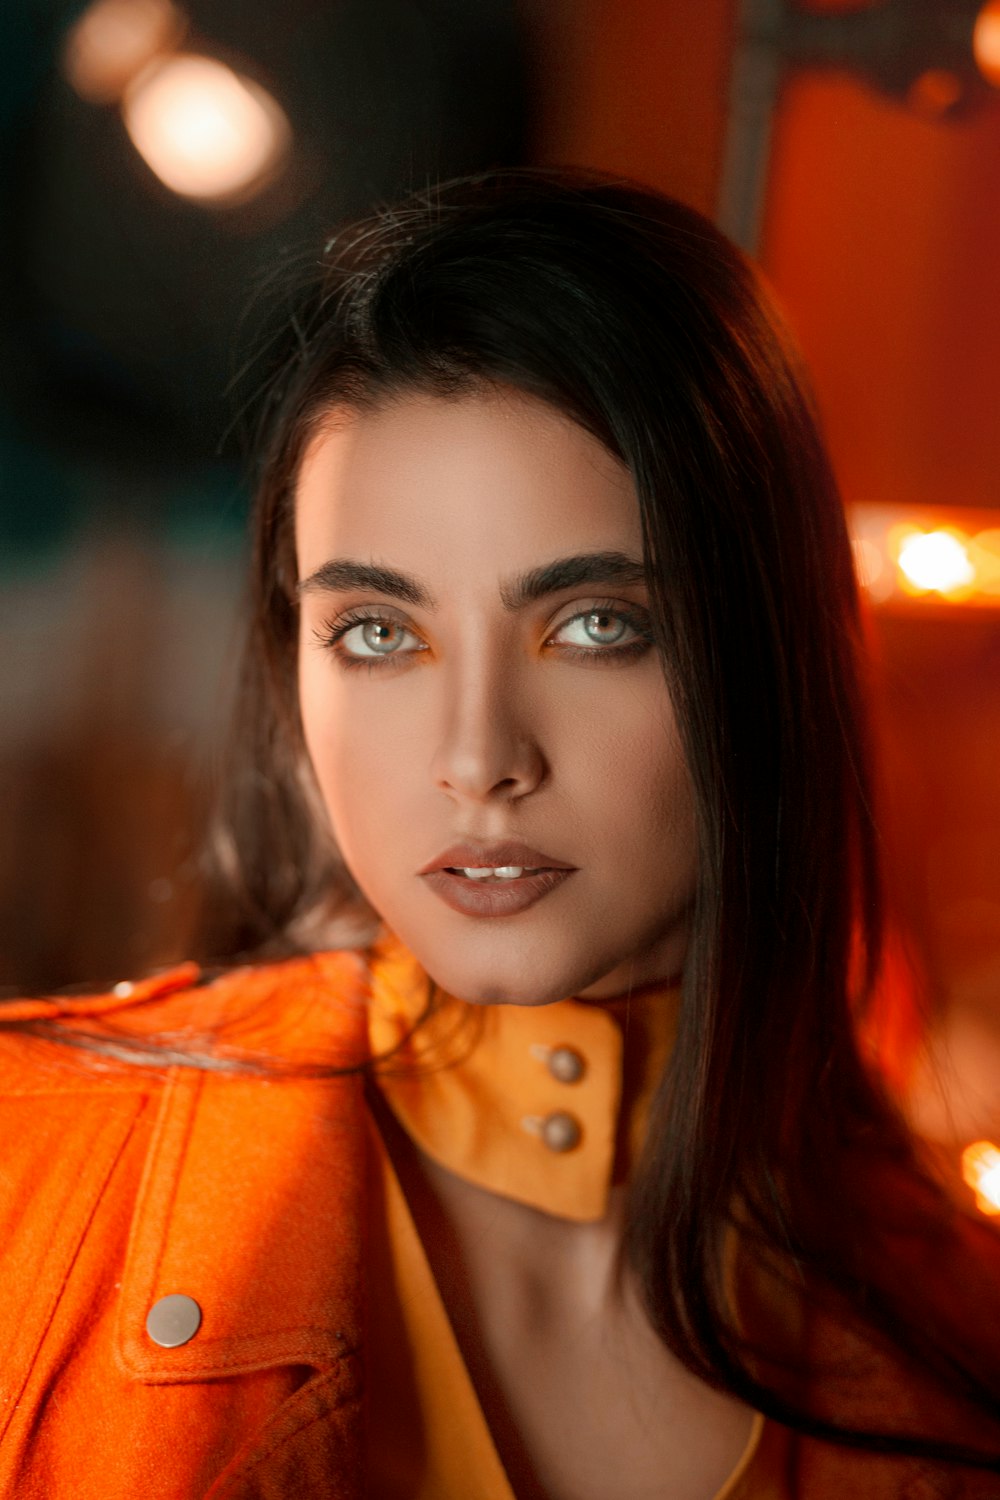 a woman with long hair wearing an orange jacket